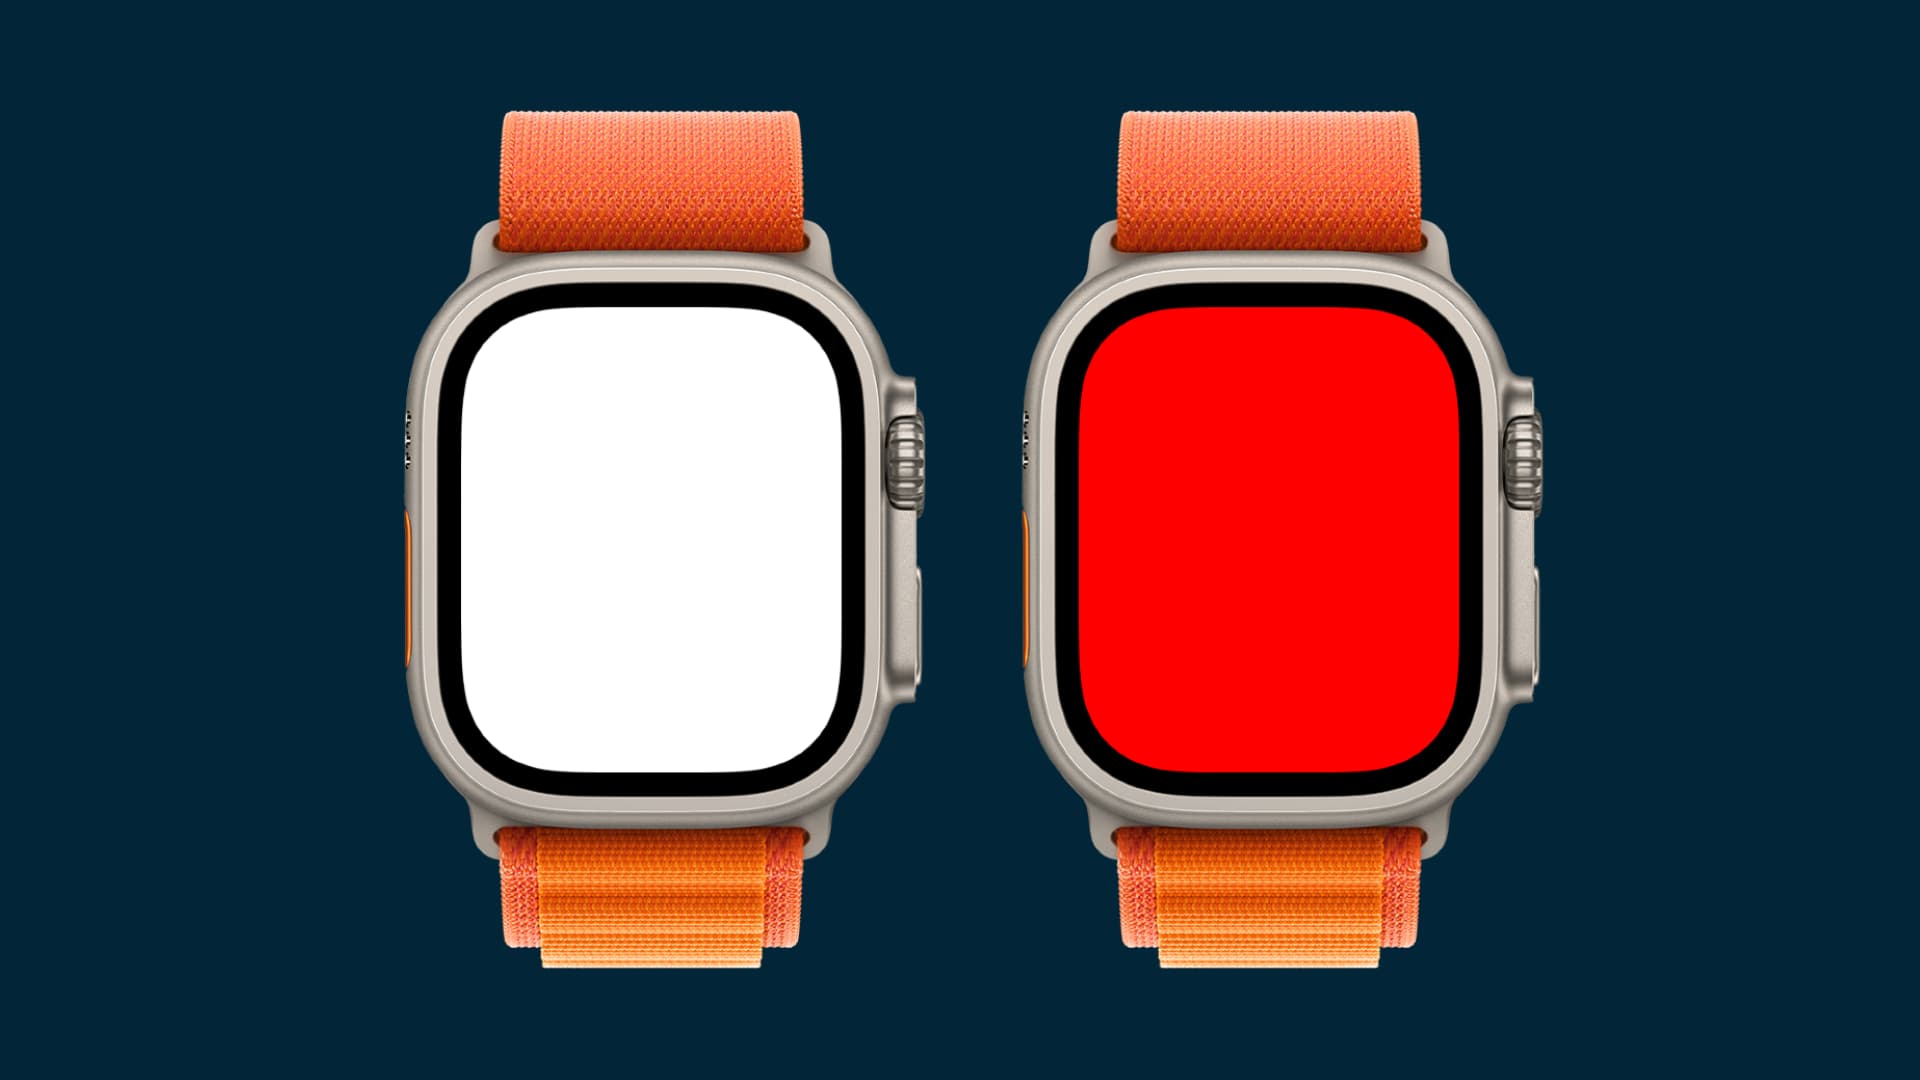 White flashlight and red alert light on Apple Watch Ultra